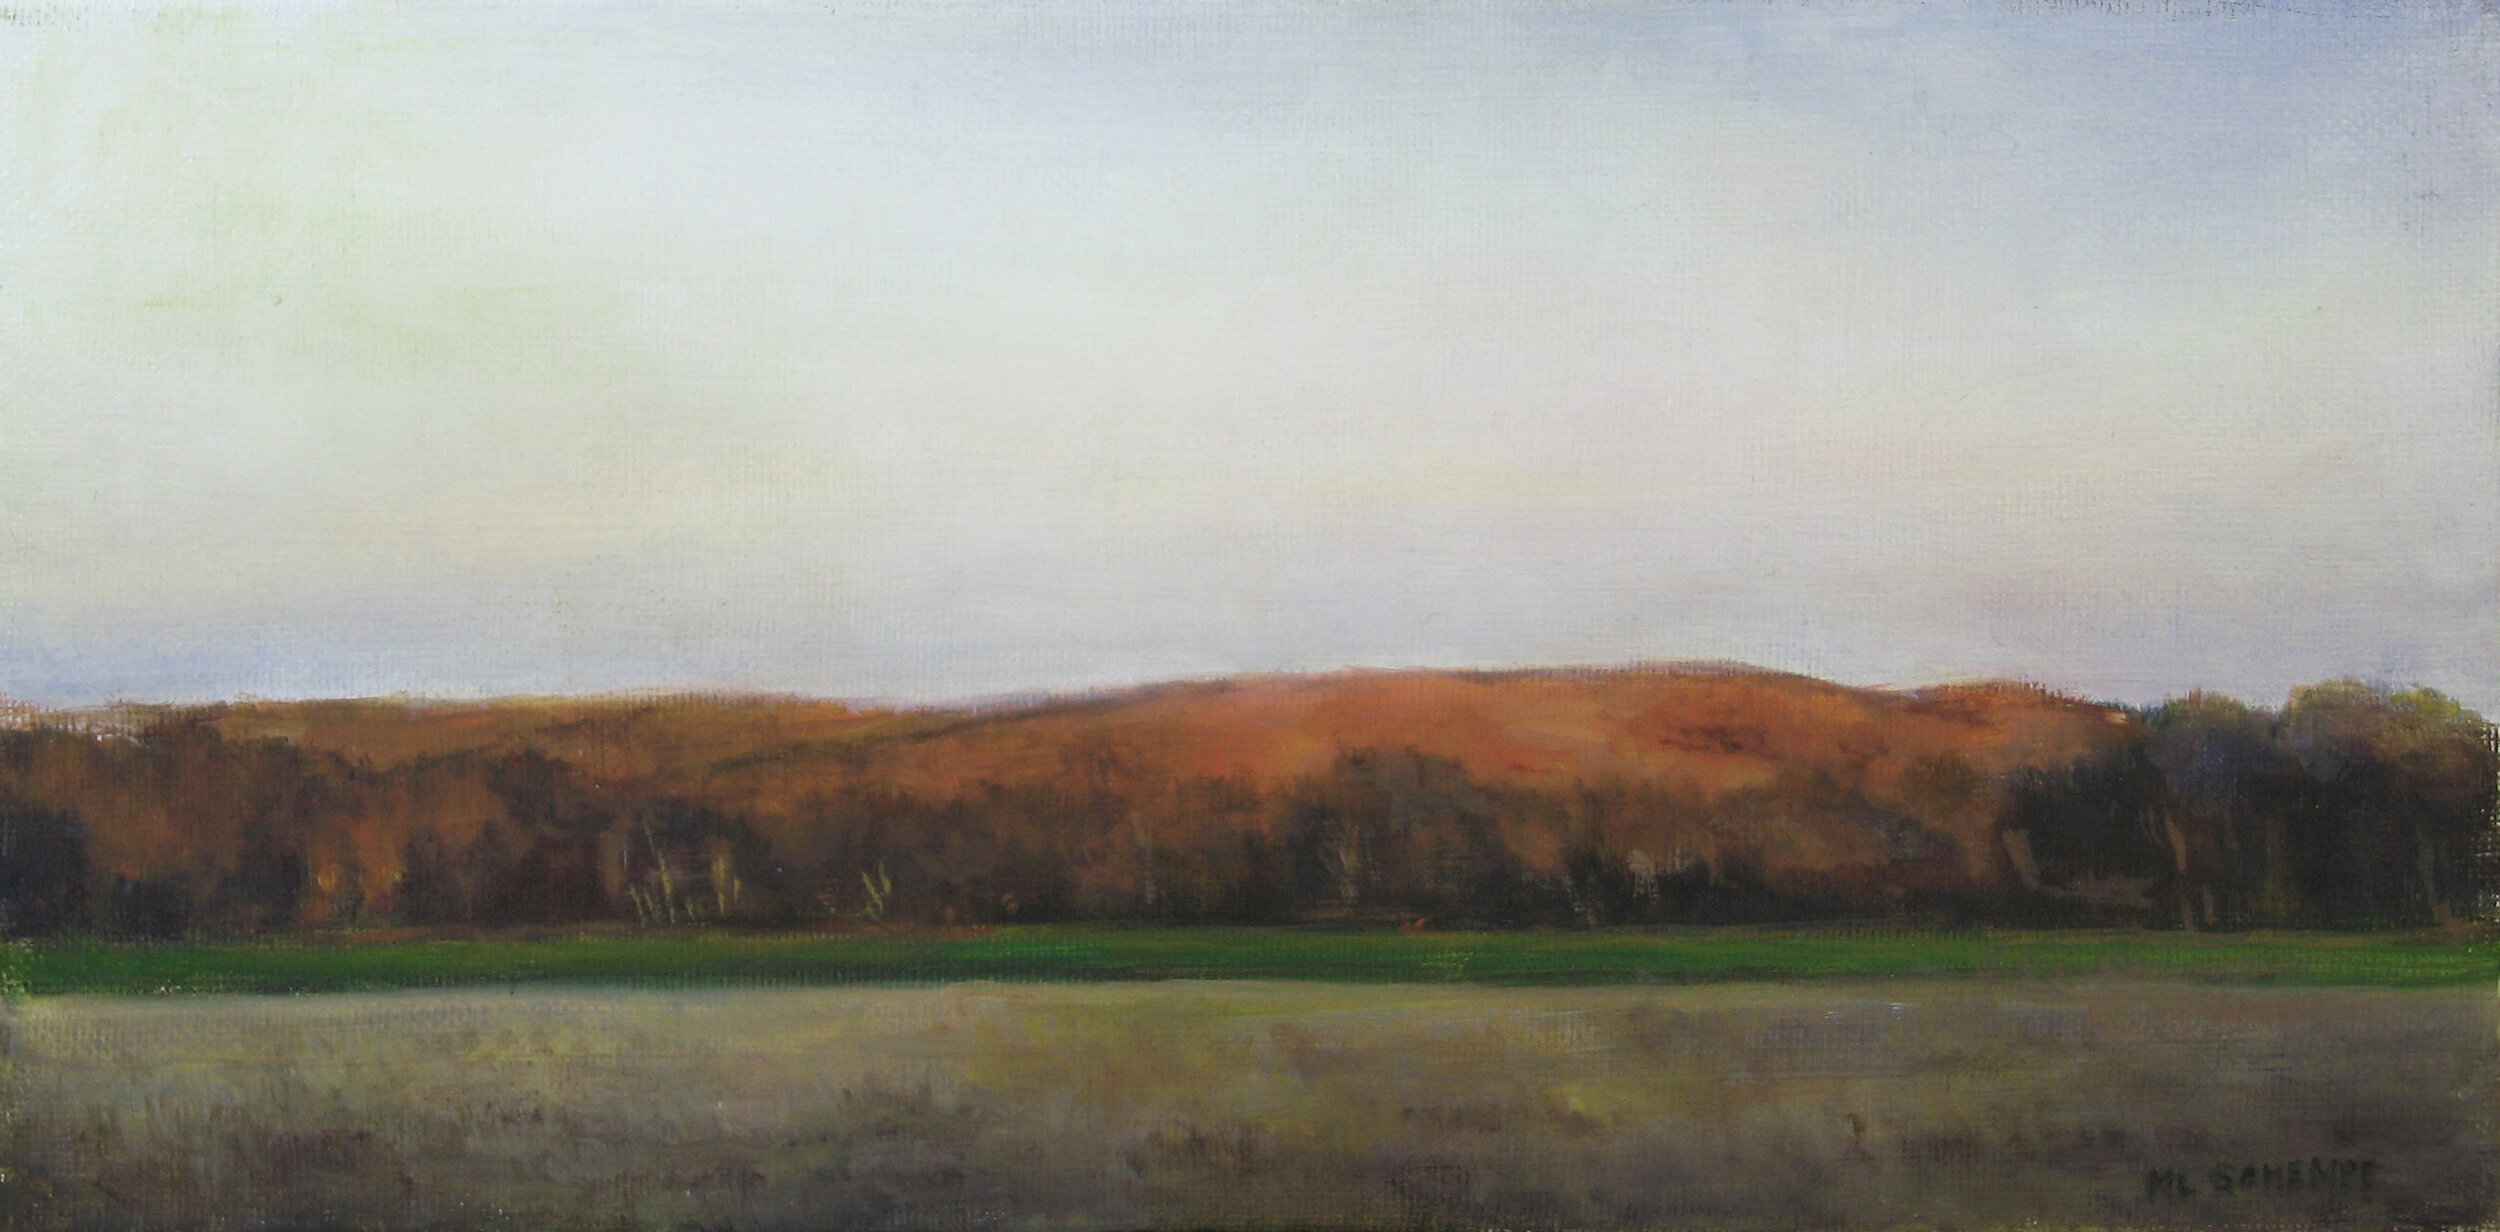  Mary Lou Schempf  Autumn Hill ,   10” x 20”, oil on canvas   (private collection )                                                                                                              